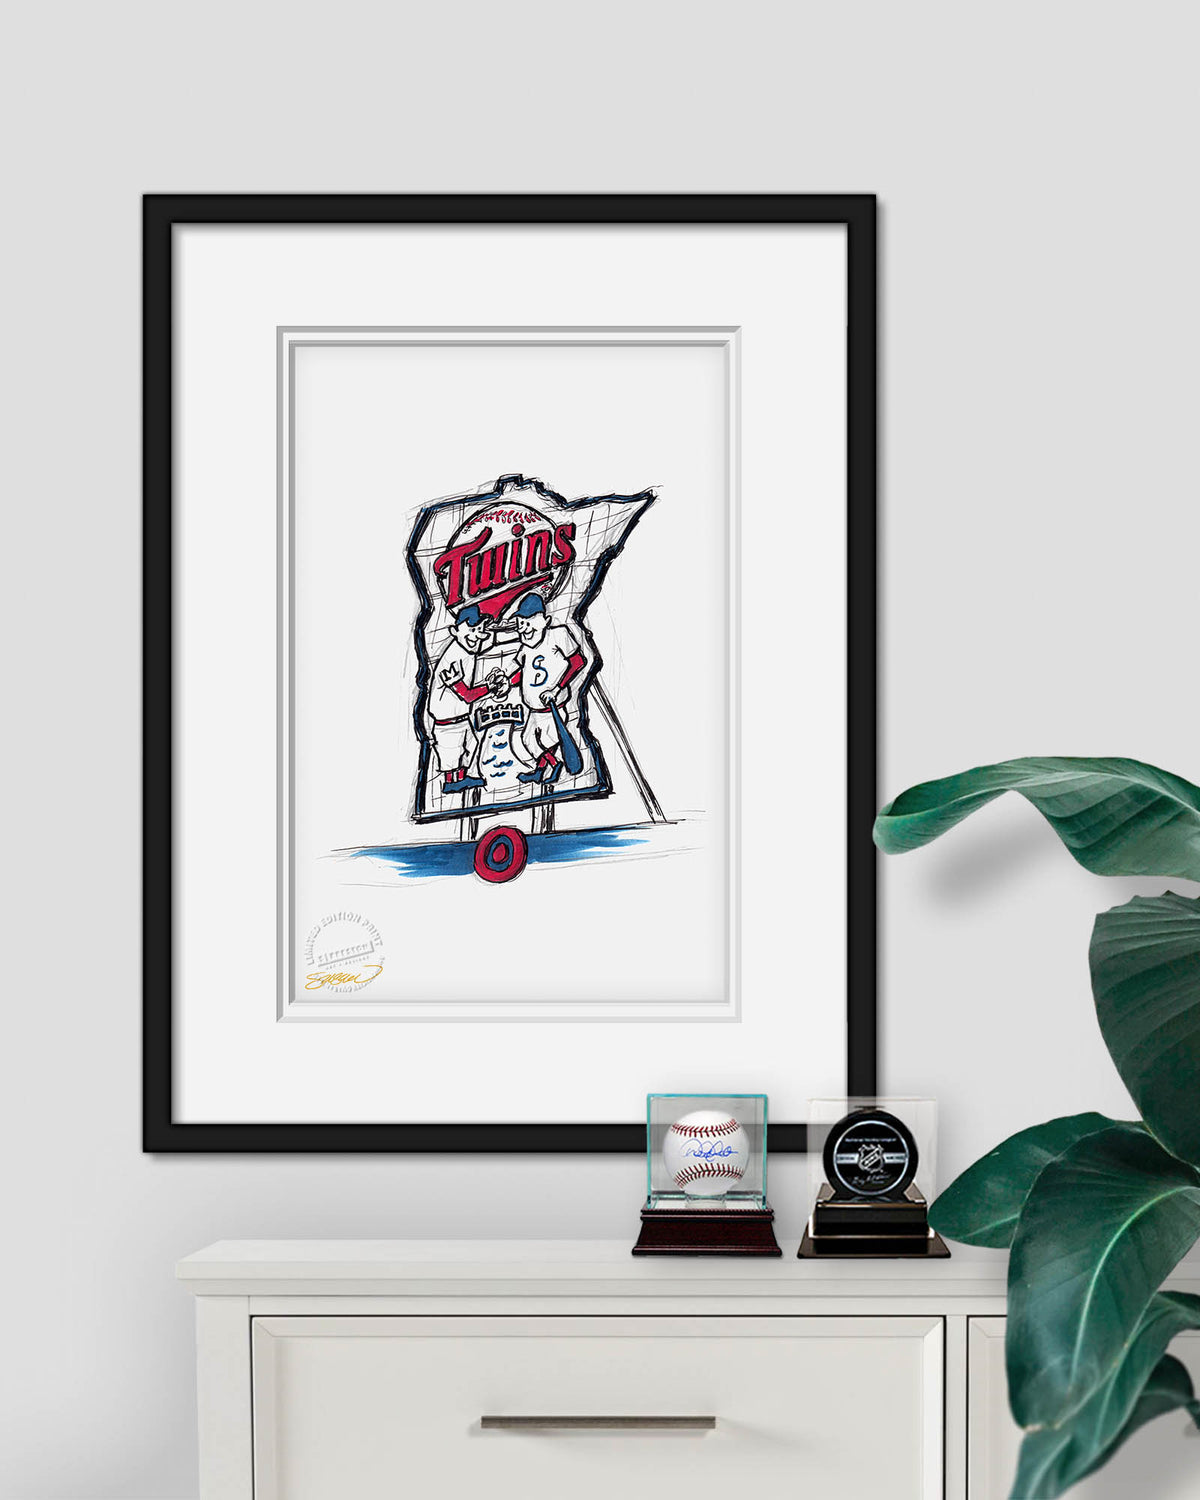 Target Field Ink Sketch (Minnie and Paul) Limited Edition Fine Art Print